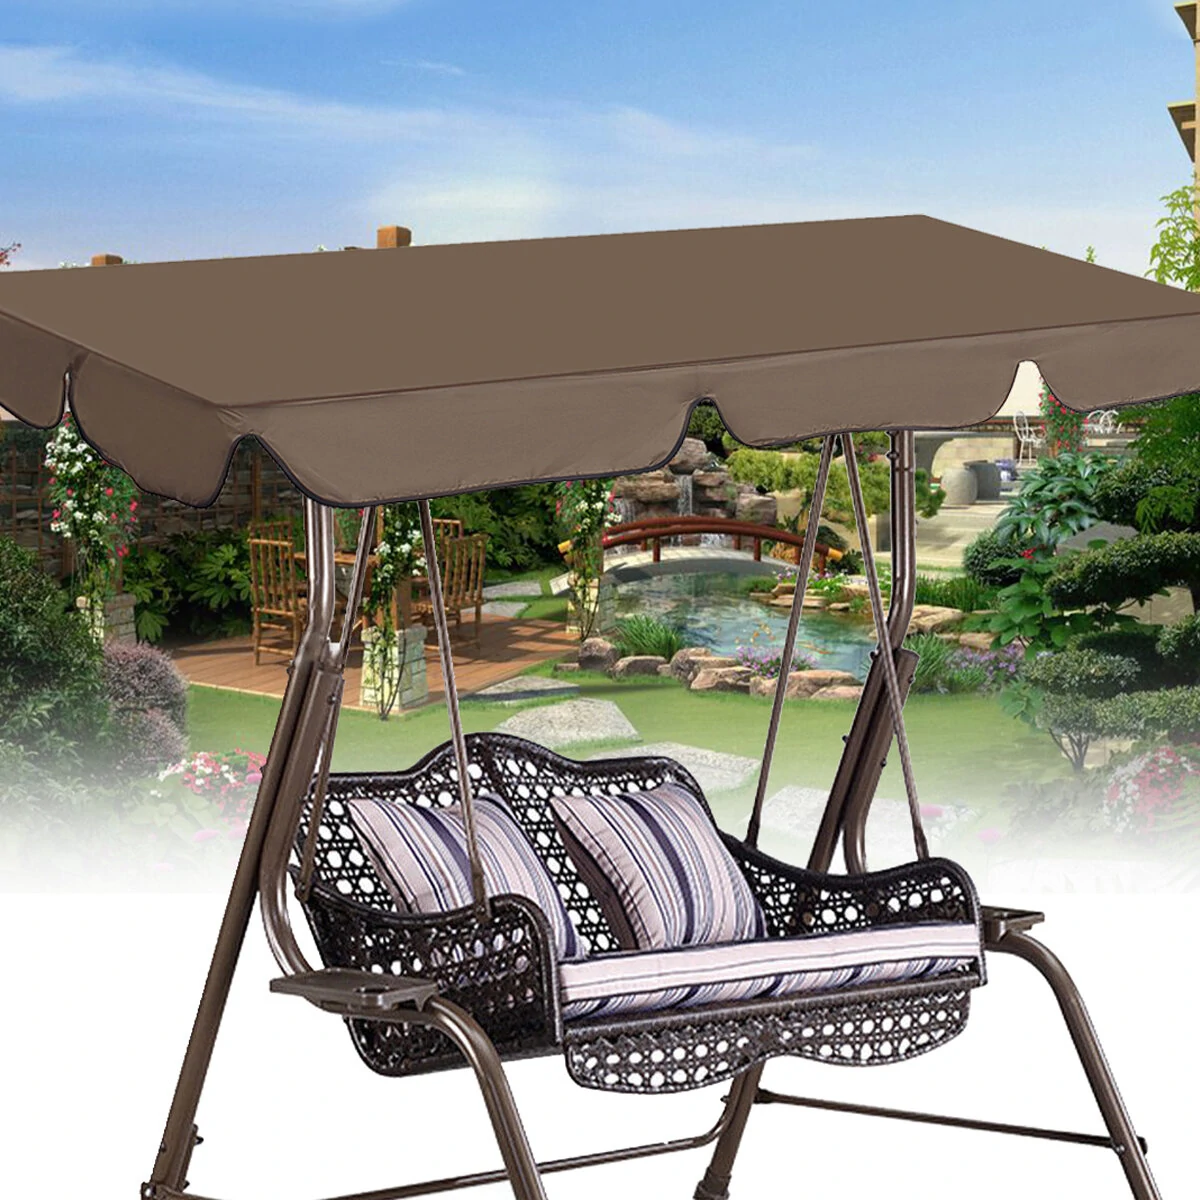 190x132cm Swing Chair Top Cover Waterproof Cover Outdoor Camping